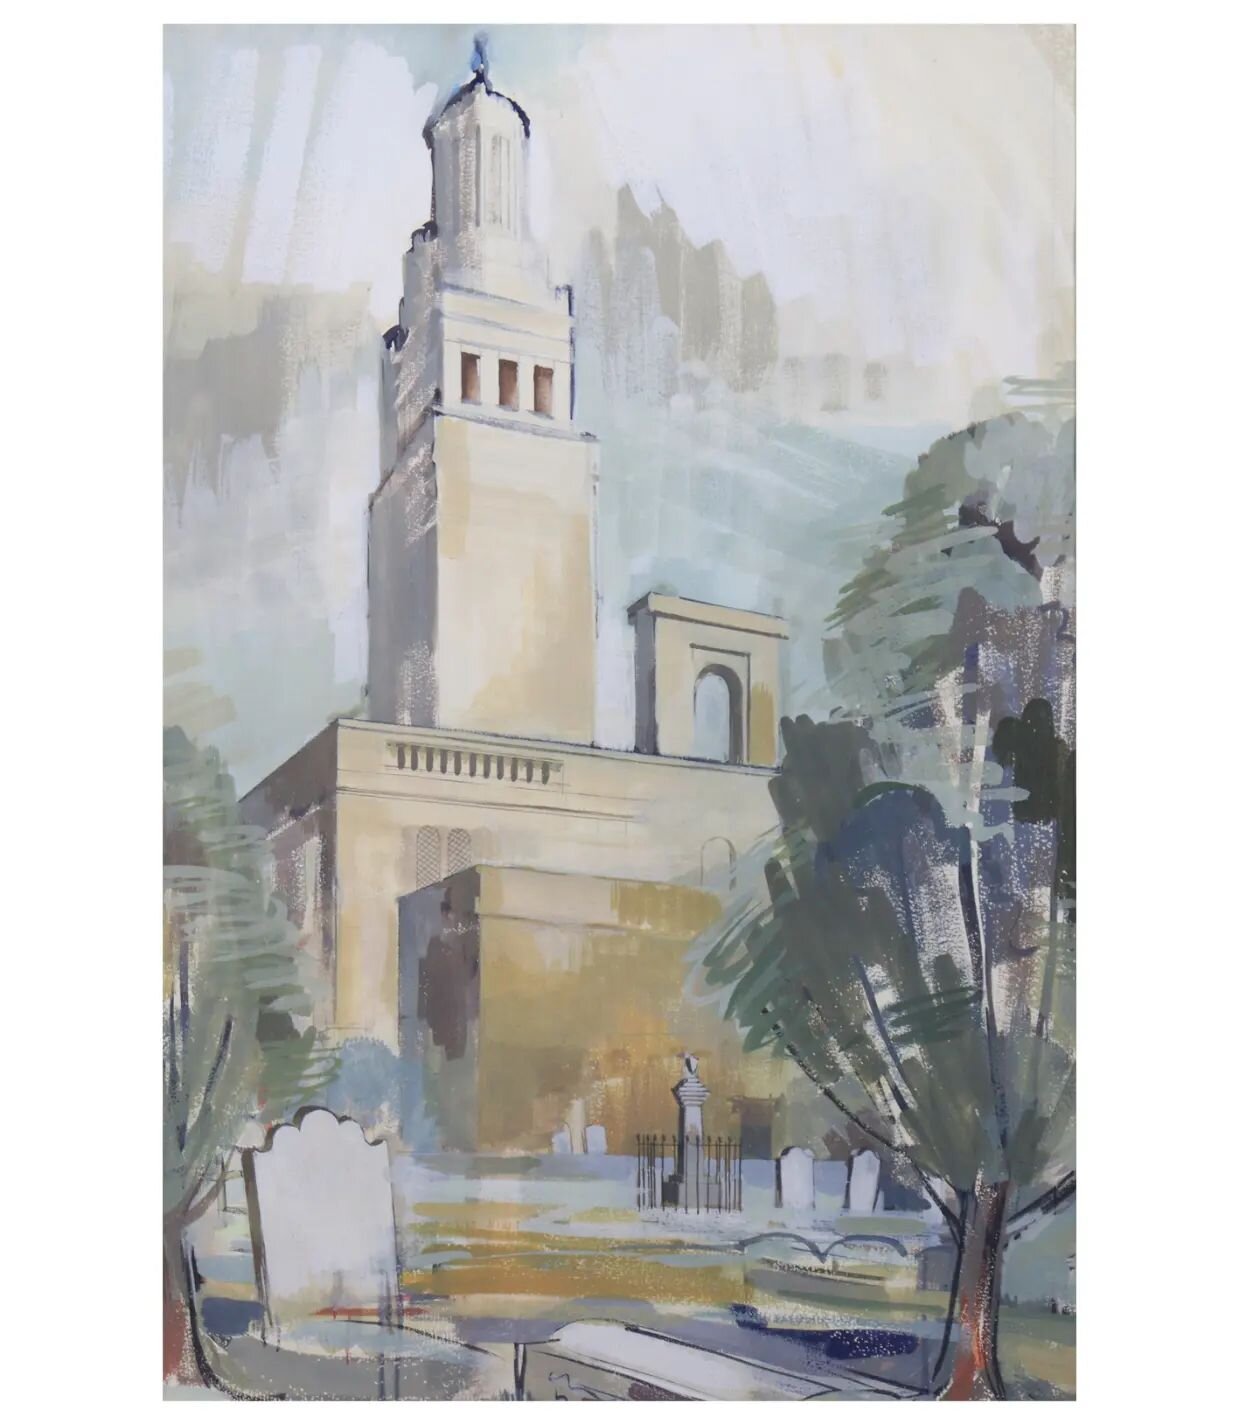 Please note we are closed for the Easter weekend and re-open on Tuesday 2nd April
We wish everyone a very happy Easter and relaxing break!

CYNTHIA TEW (1909-)
Beckford's Tower, Bath

Included in our May Fine Art and Antiques Sale
Accepting entries u